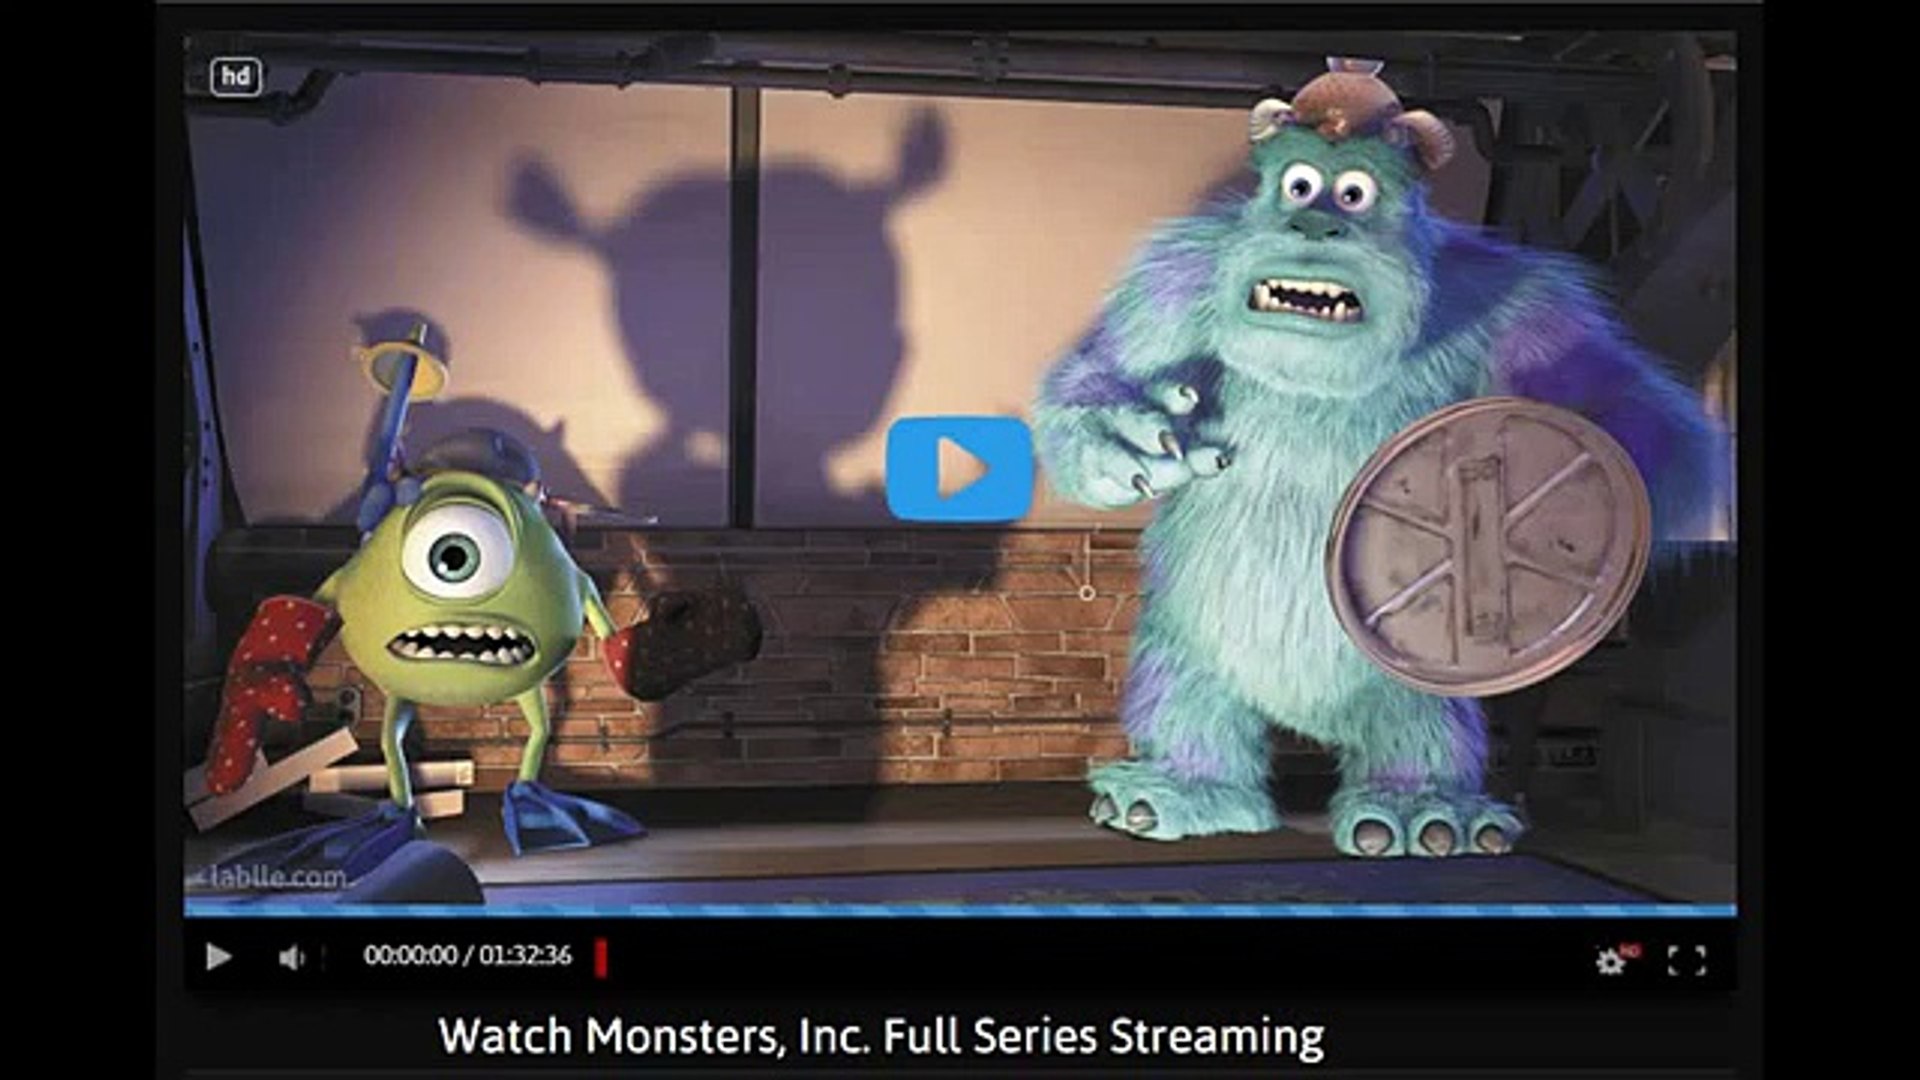 Monsters University streaming: where to watch online?